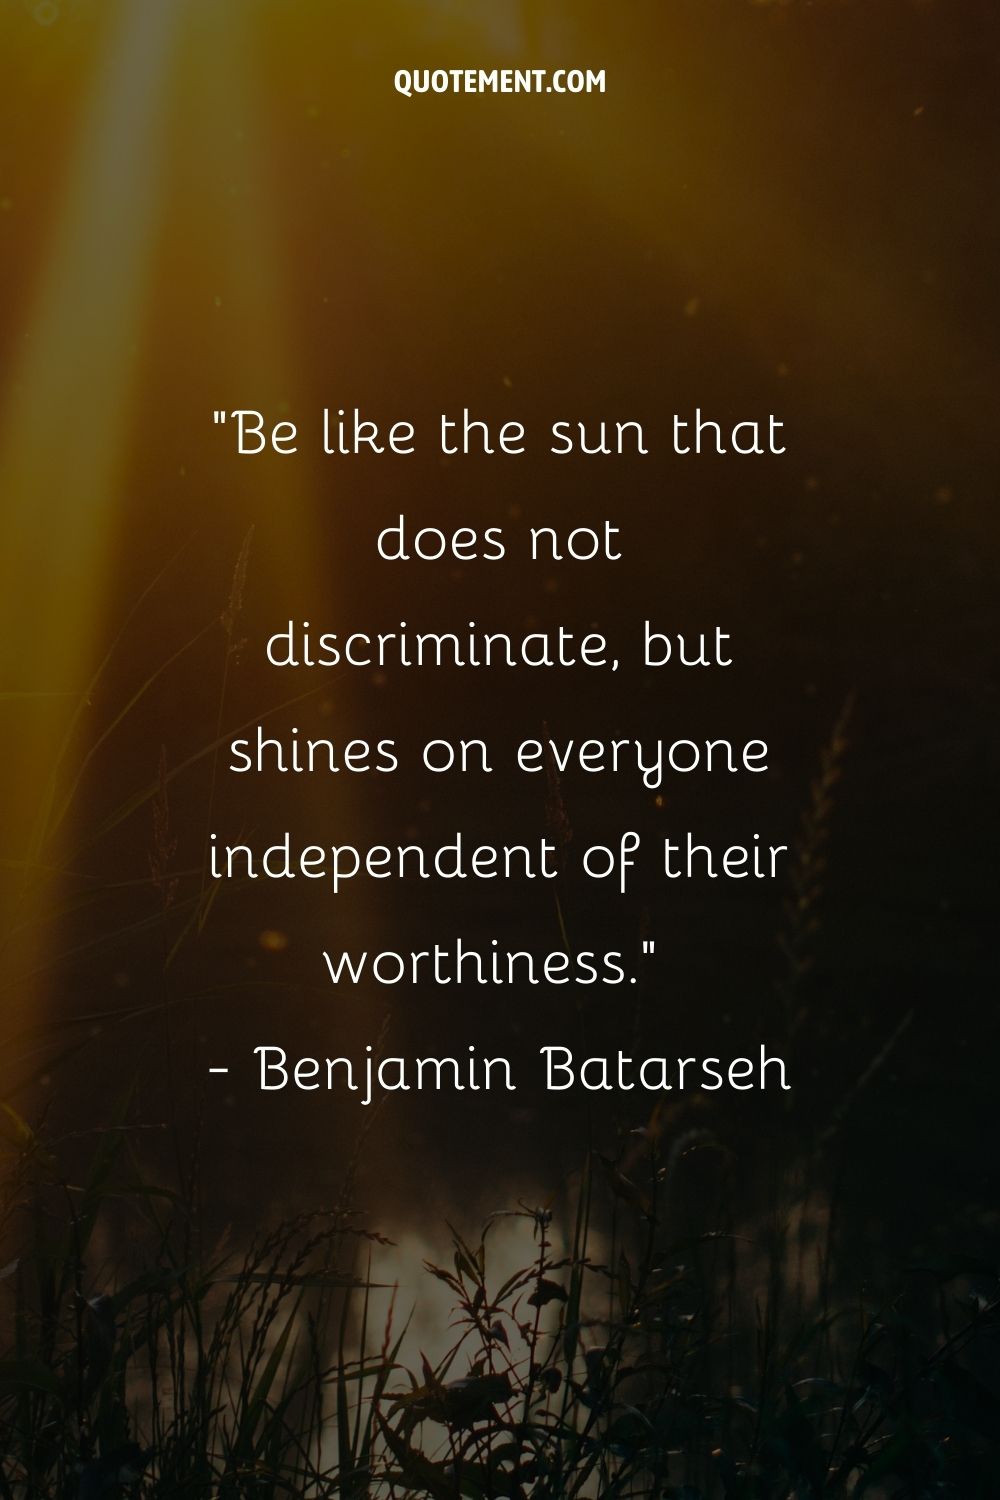 Be like the sun that does not discriminate, but shines on everyone independent of their worthiness.